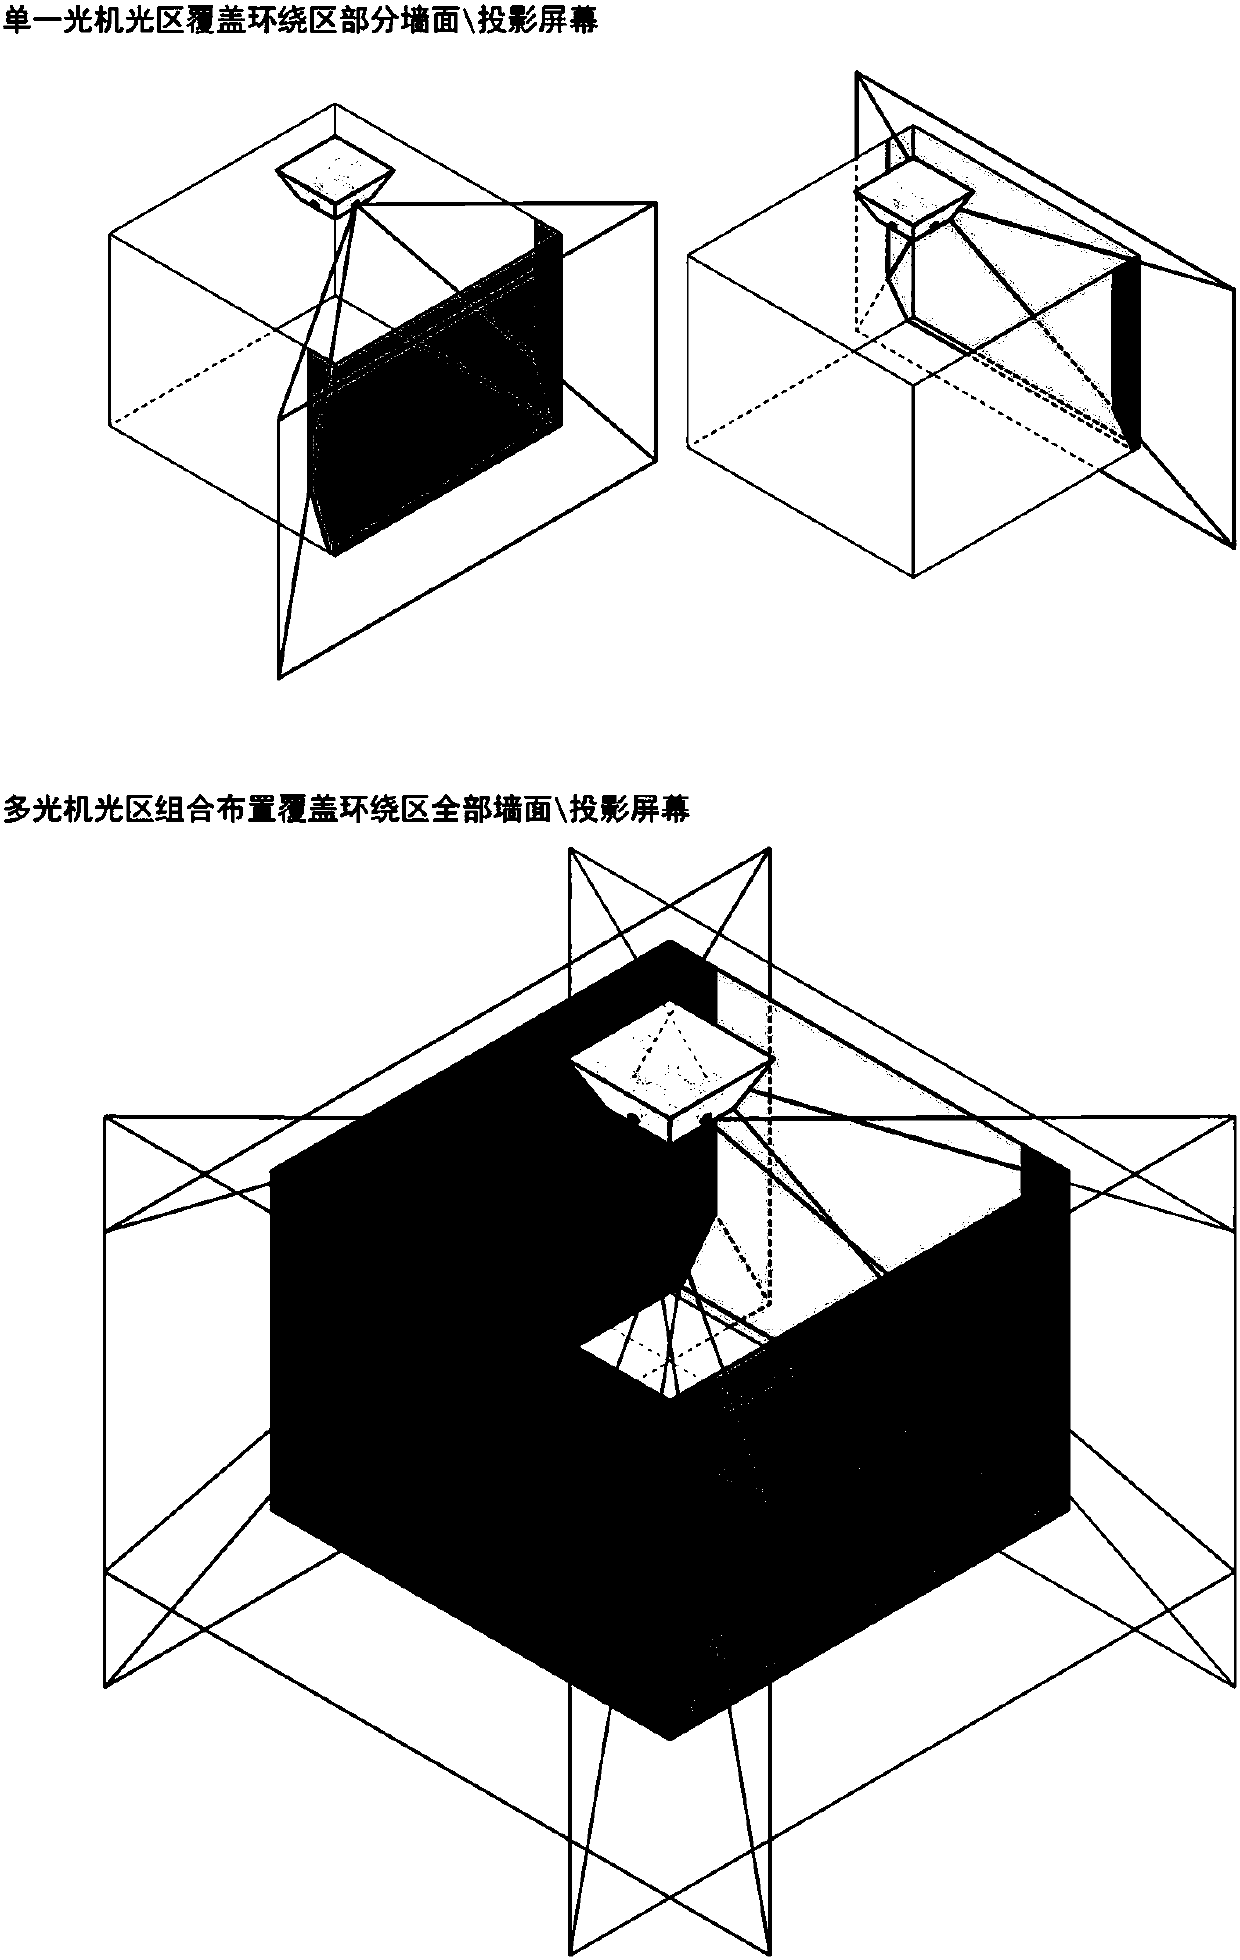 Cross multi-directional cylindrical screen full-coverage projection method, system and projector